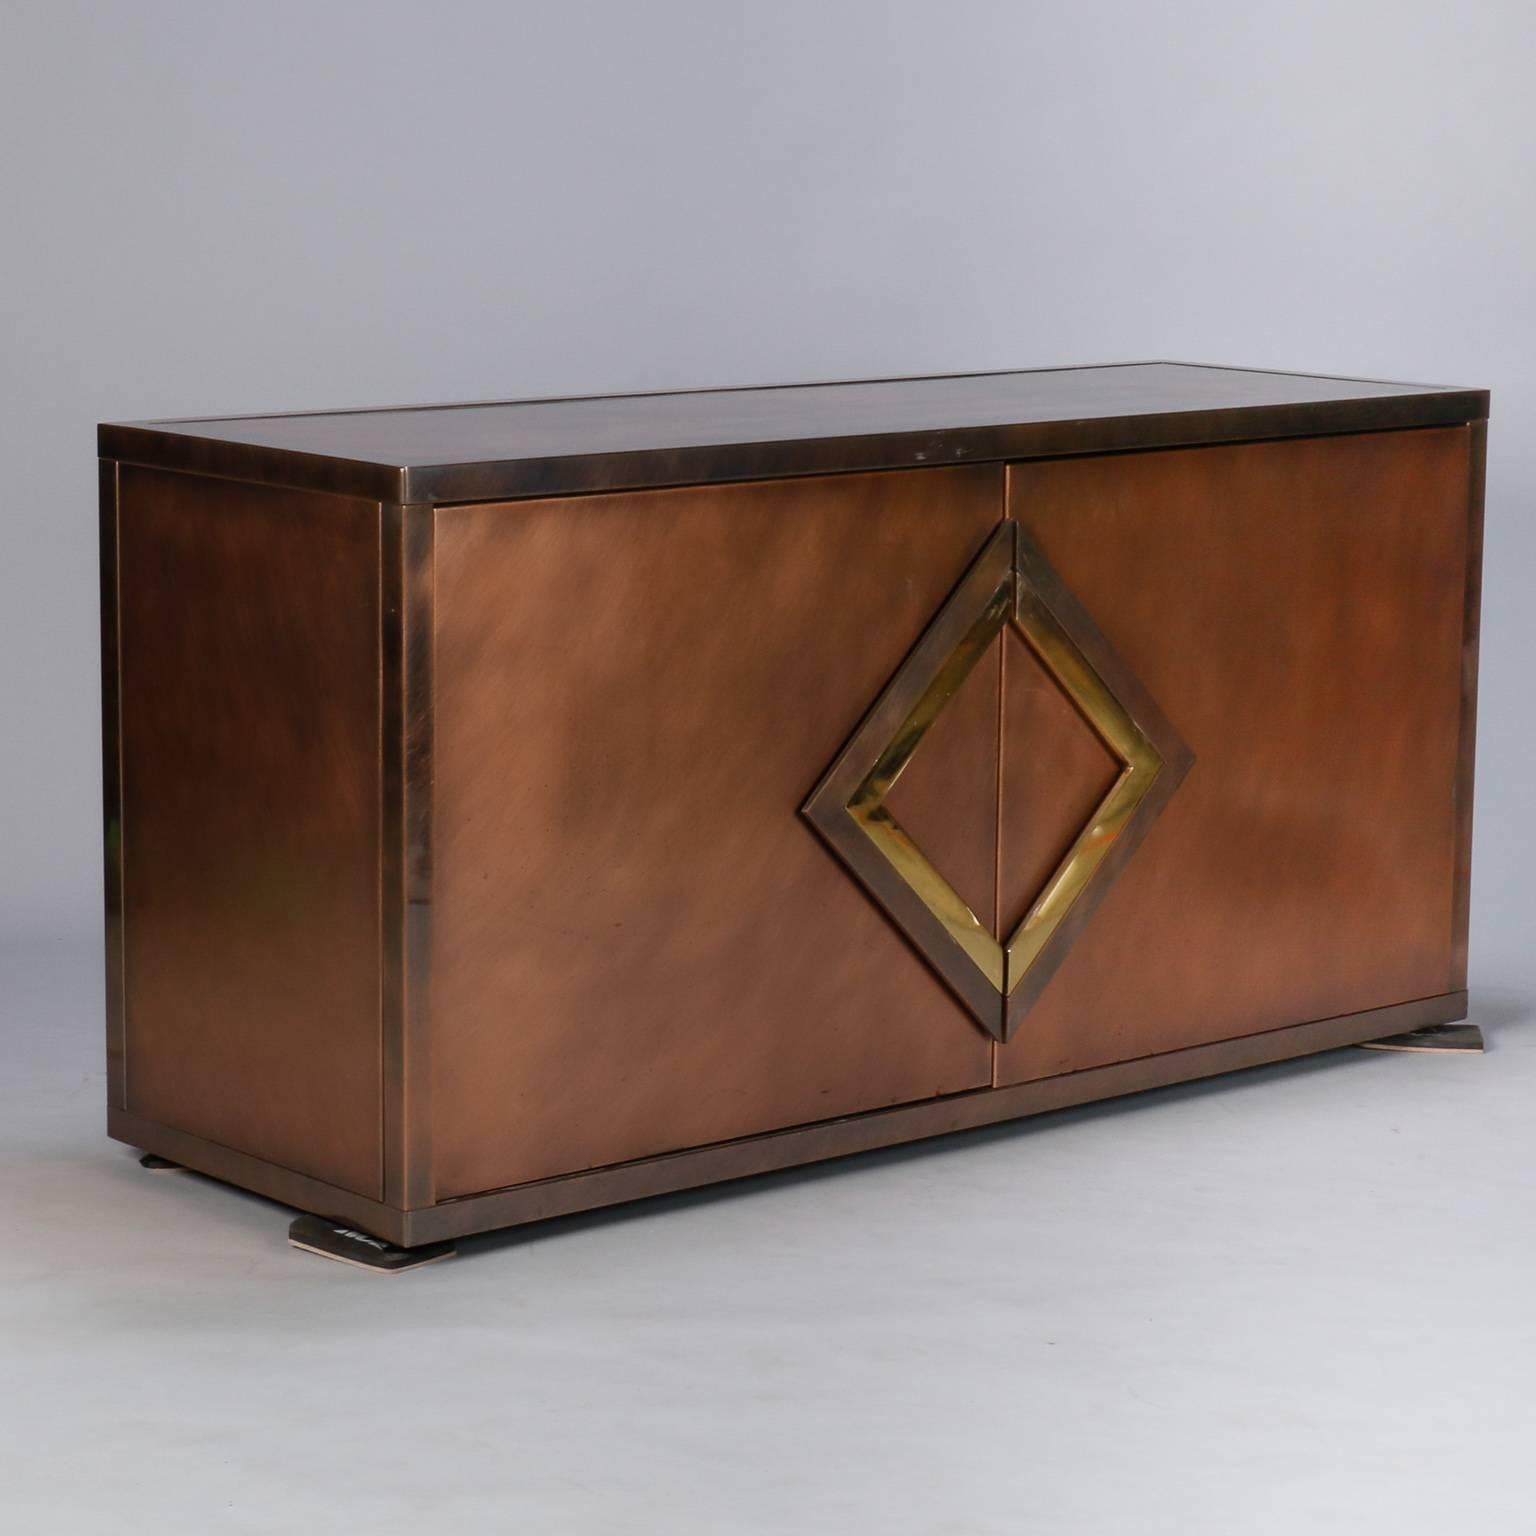 Circa 1970s large mixed metal buffet / server / credenza / cabinet by Maison Jansen. Cabinet has textured copper body with contrasting brass geometric pulls on hinged compartment doors.  Polished metal top, interior shelves. 
